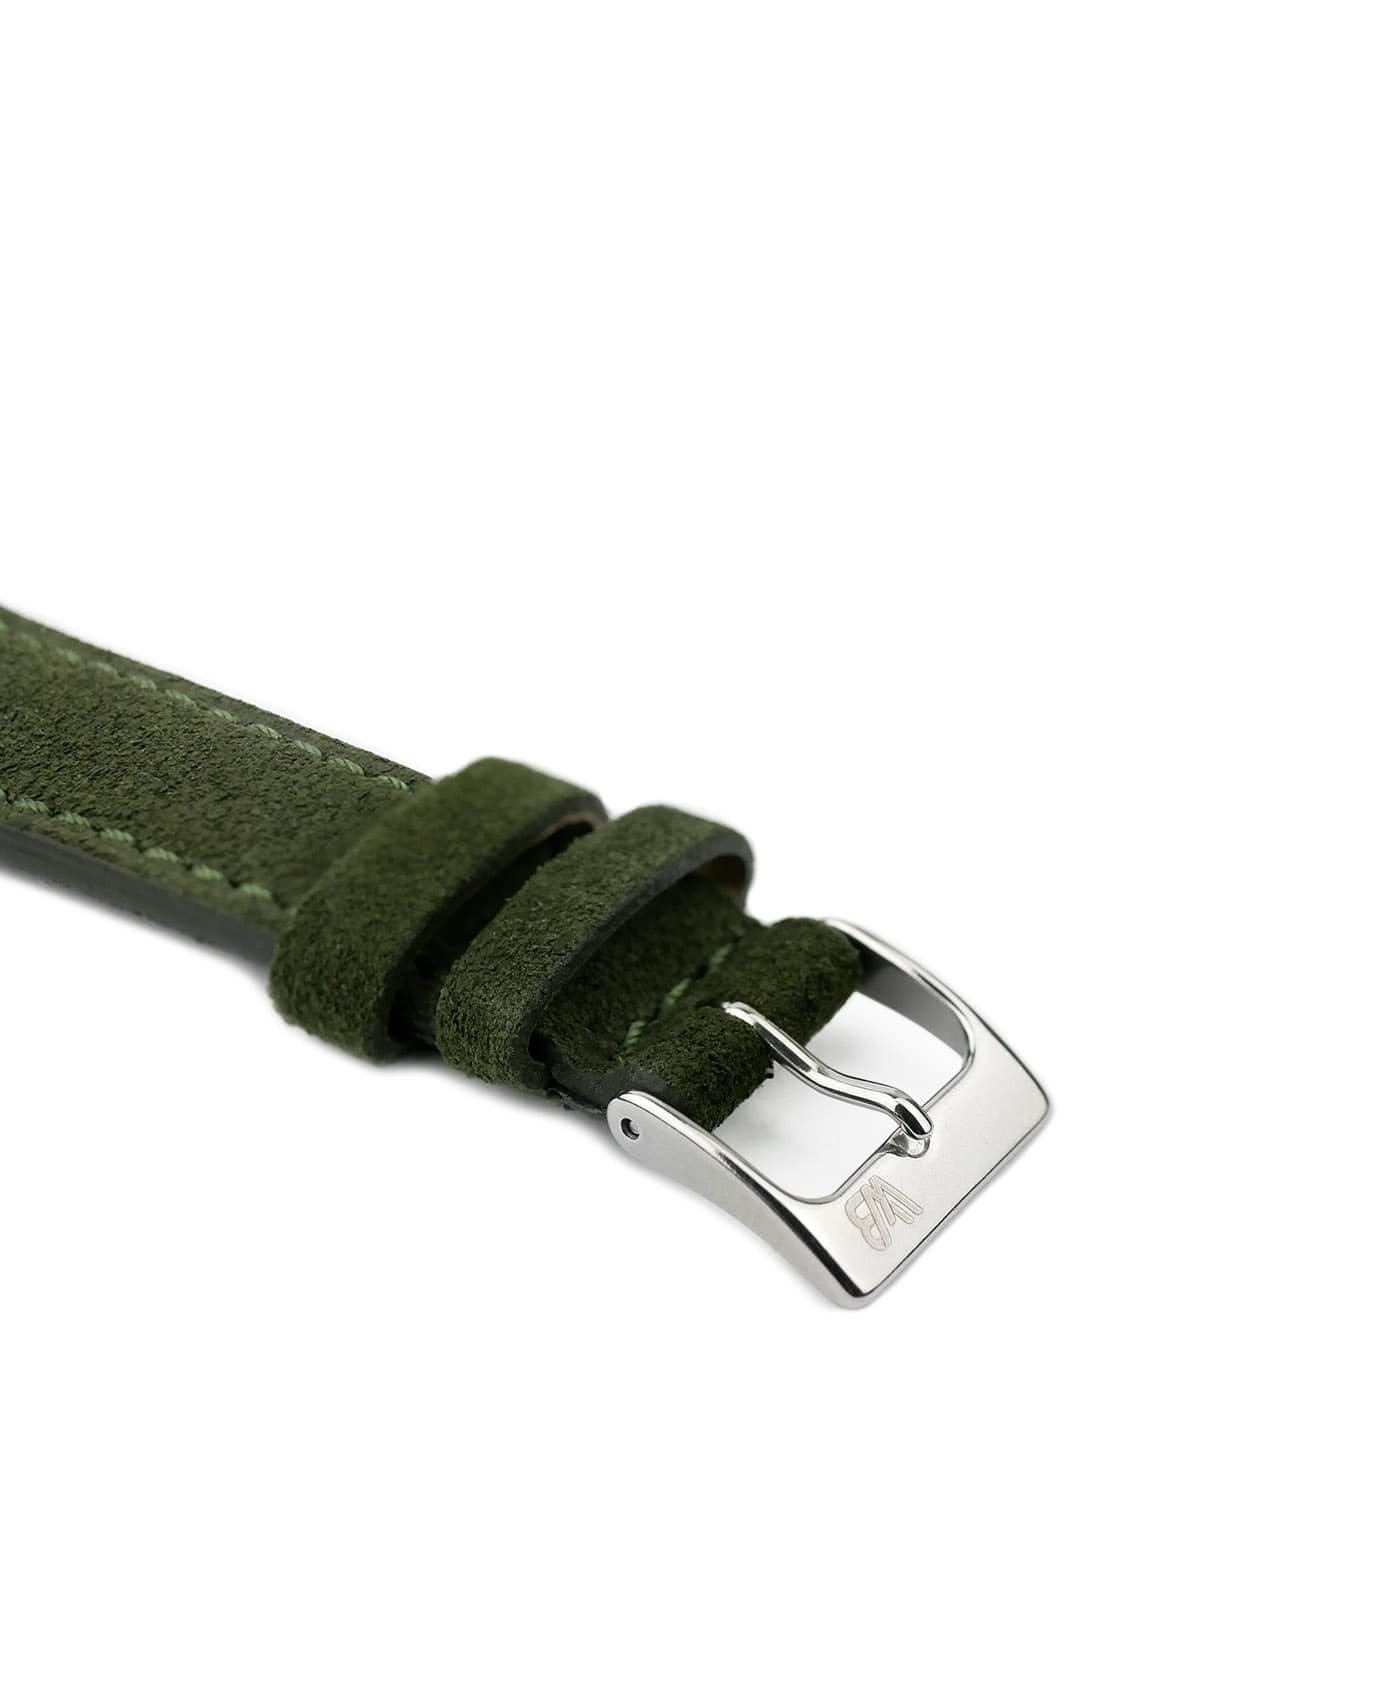 Suede leather strap with side seam_green_side buckle